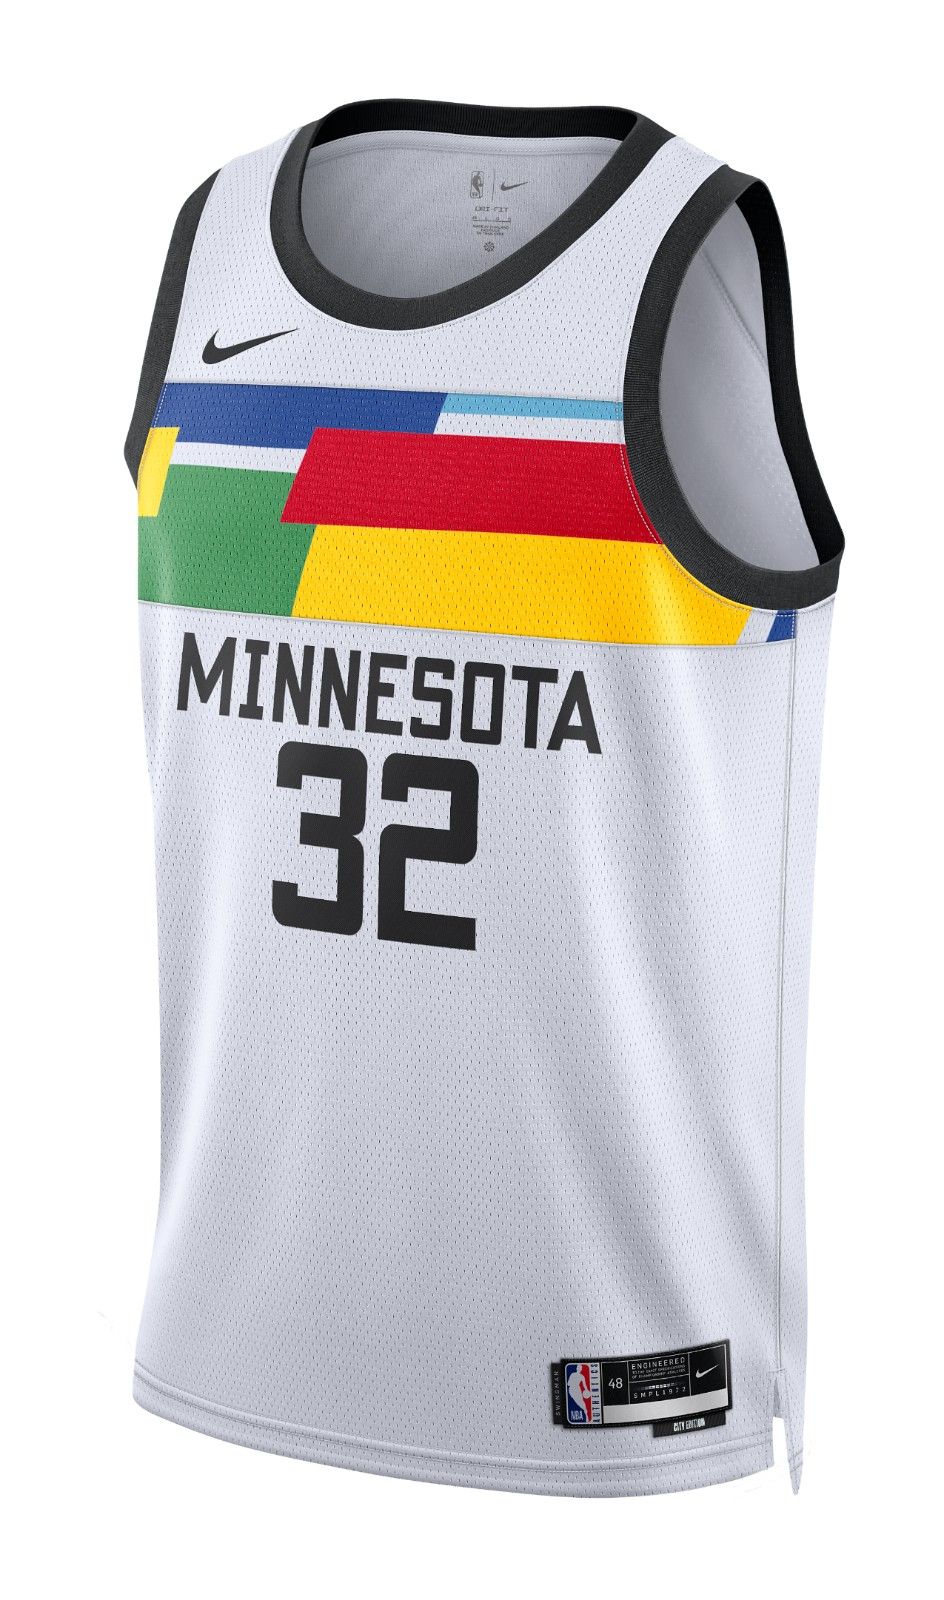 The LEAKED Minnesota Timberwolves jerseys are DOG WATER🤢 #shorts 